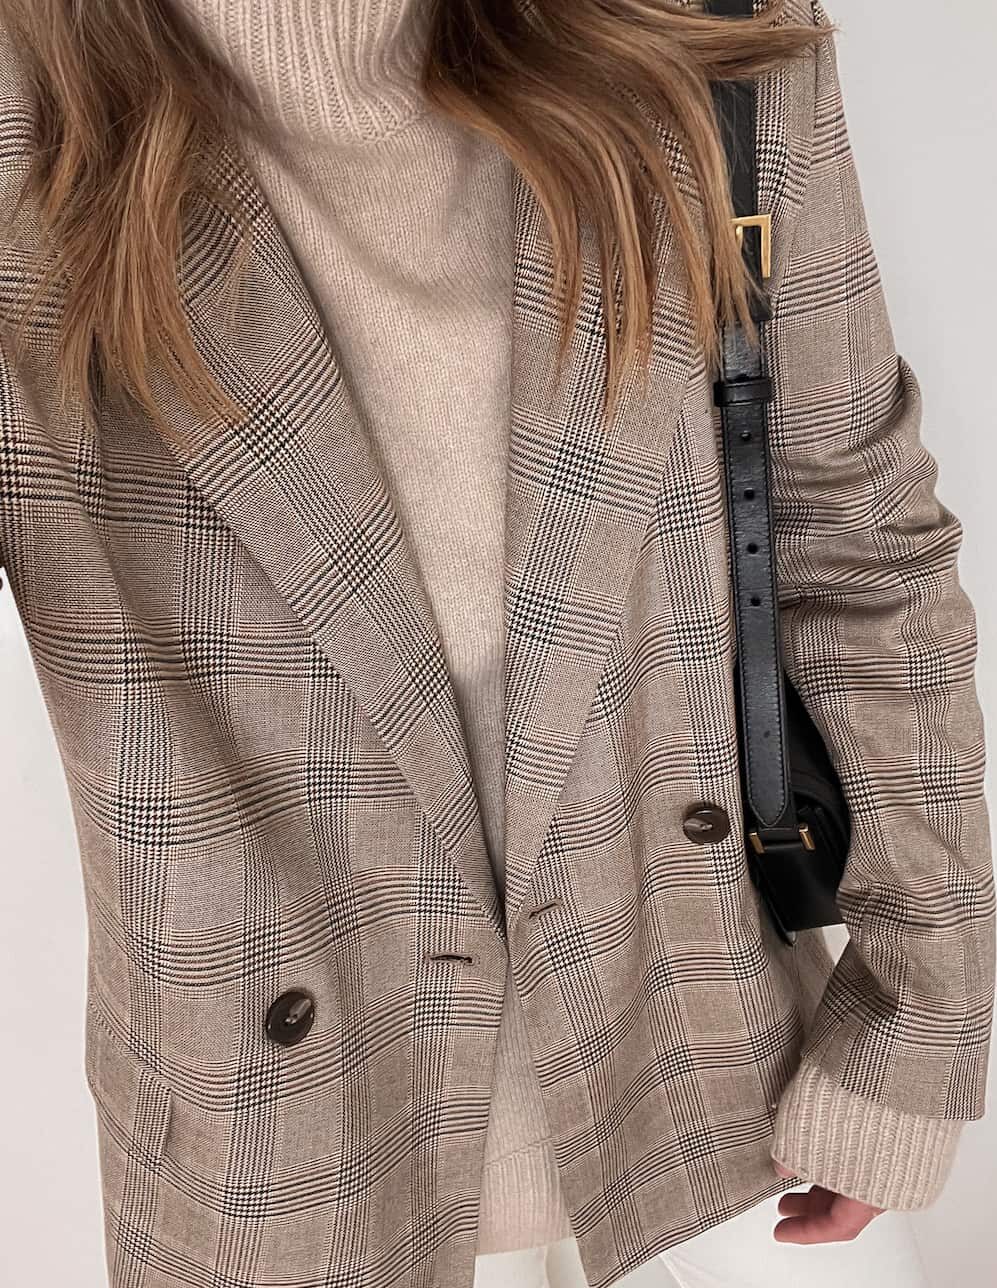 Up close shot of a woman wearing white jeans, a tan turtleneck and a tan and black plaid blazer.